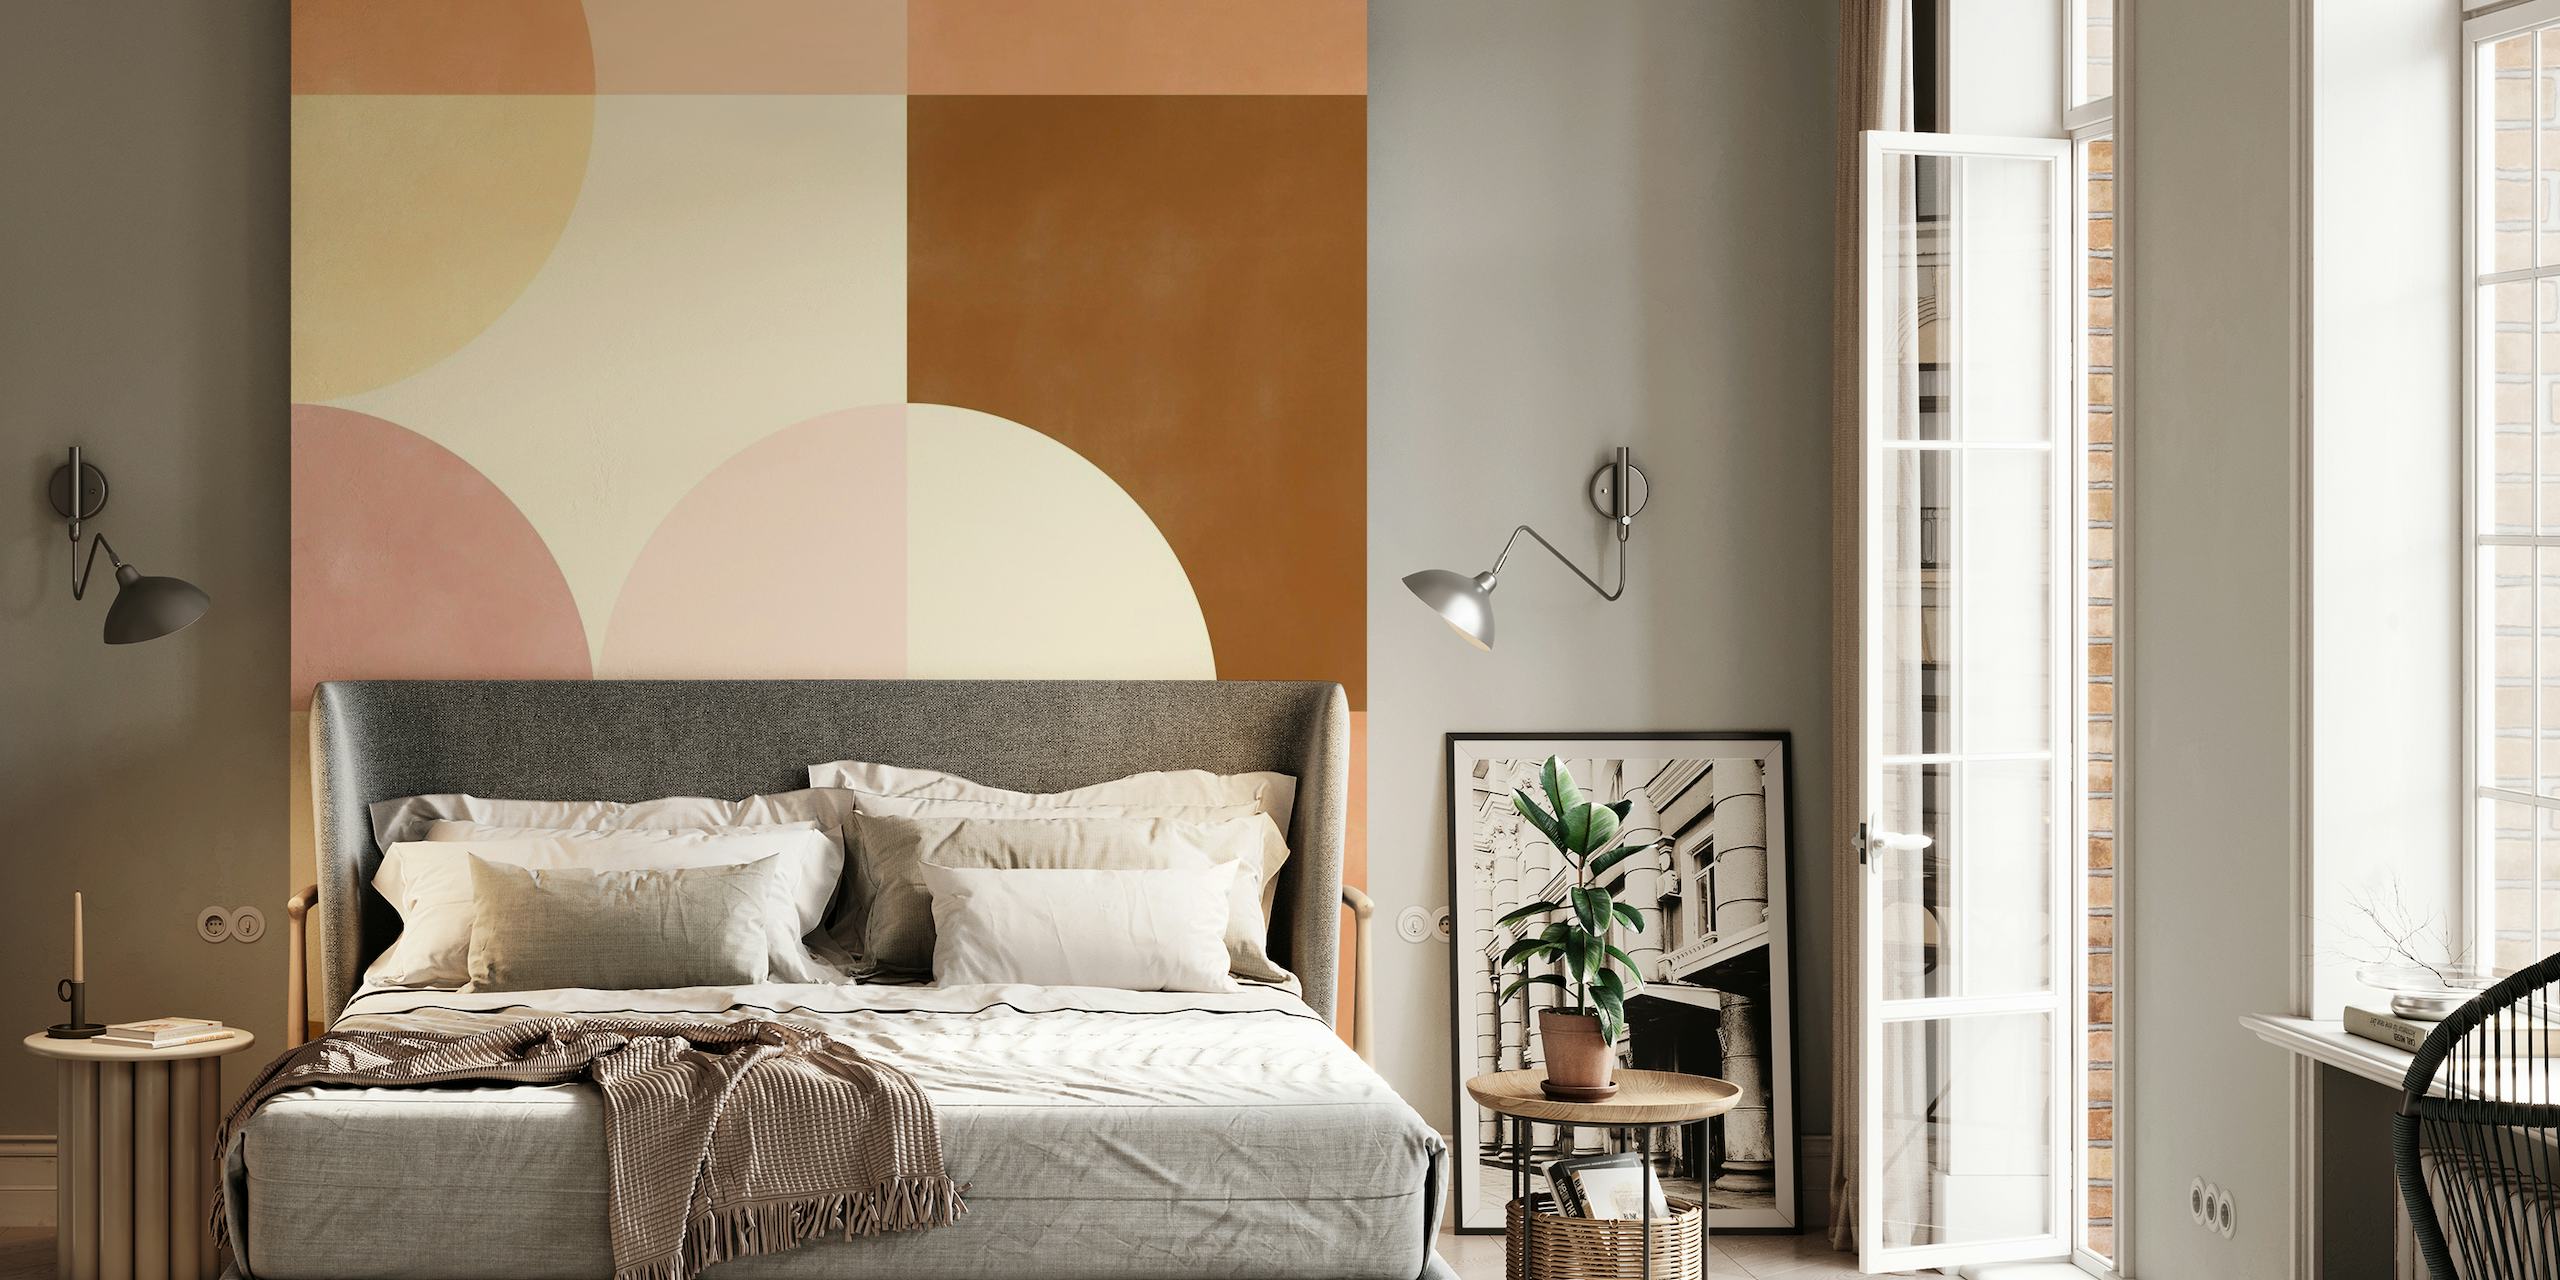 Abstract geometric wall mural in soft pink and earthy brown tones